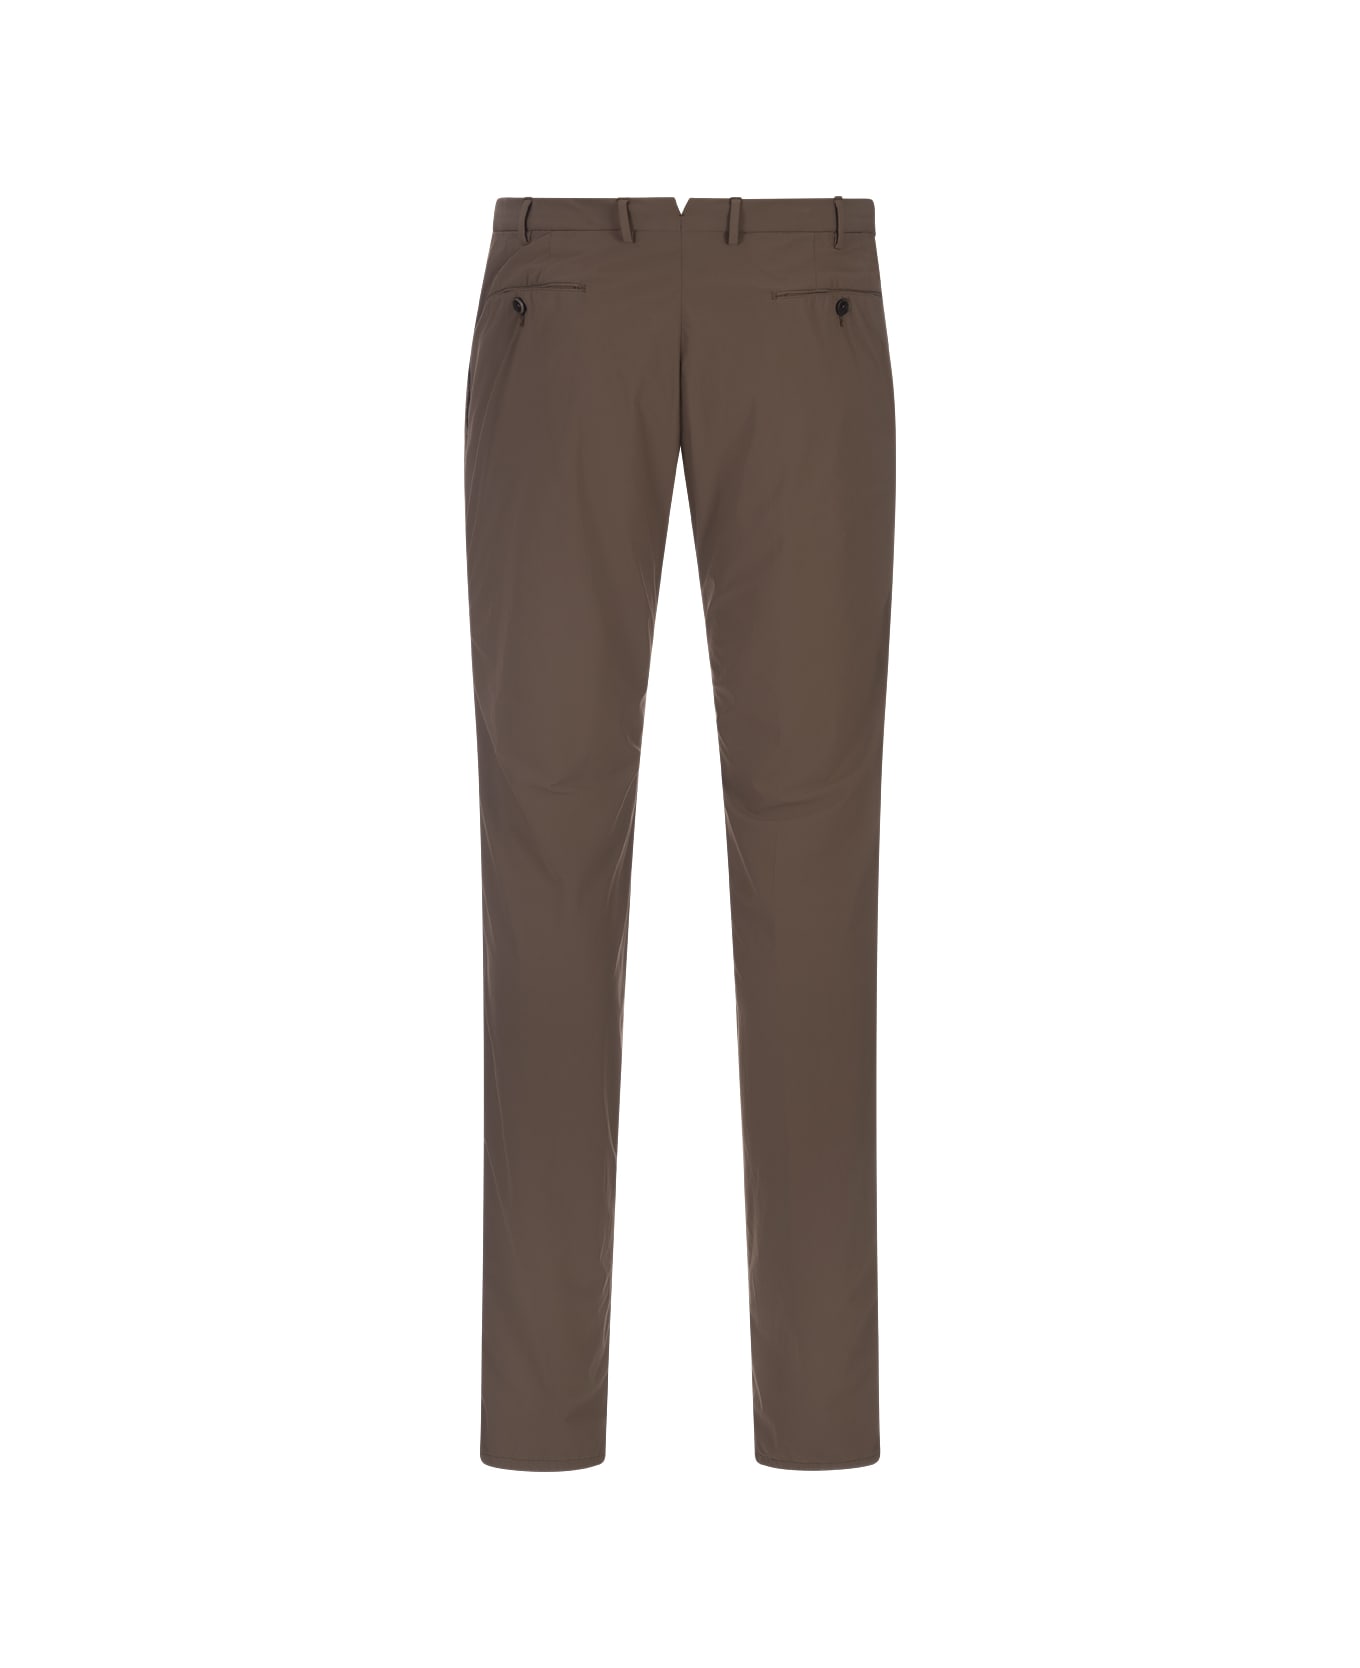 PT Torino Brown Kinetic Fabric Classic Trousers - Brown